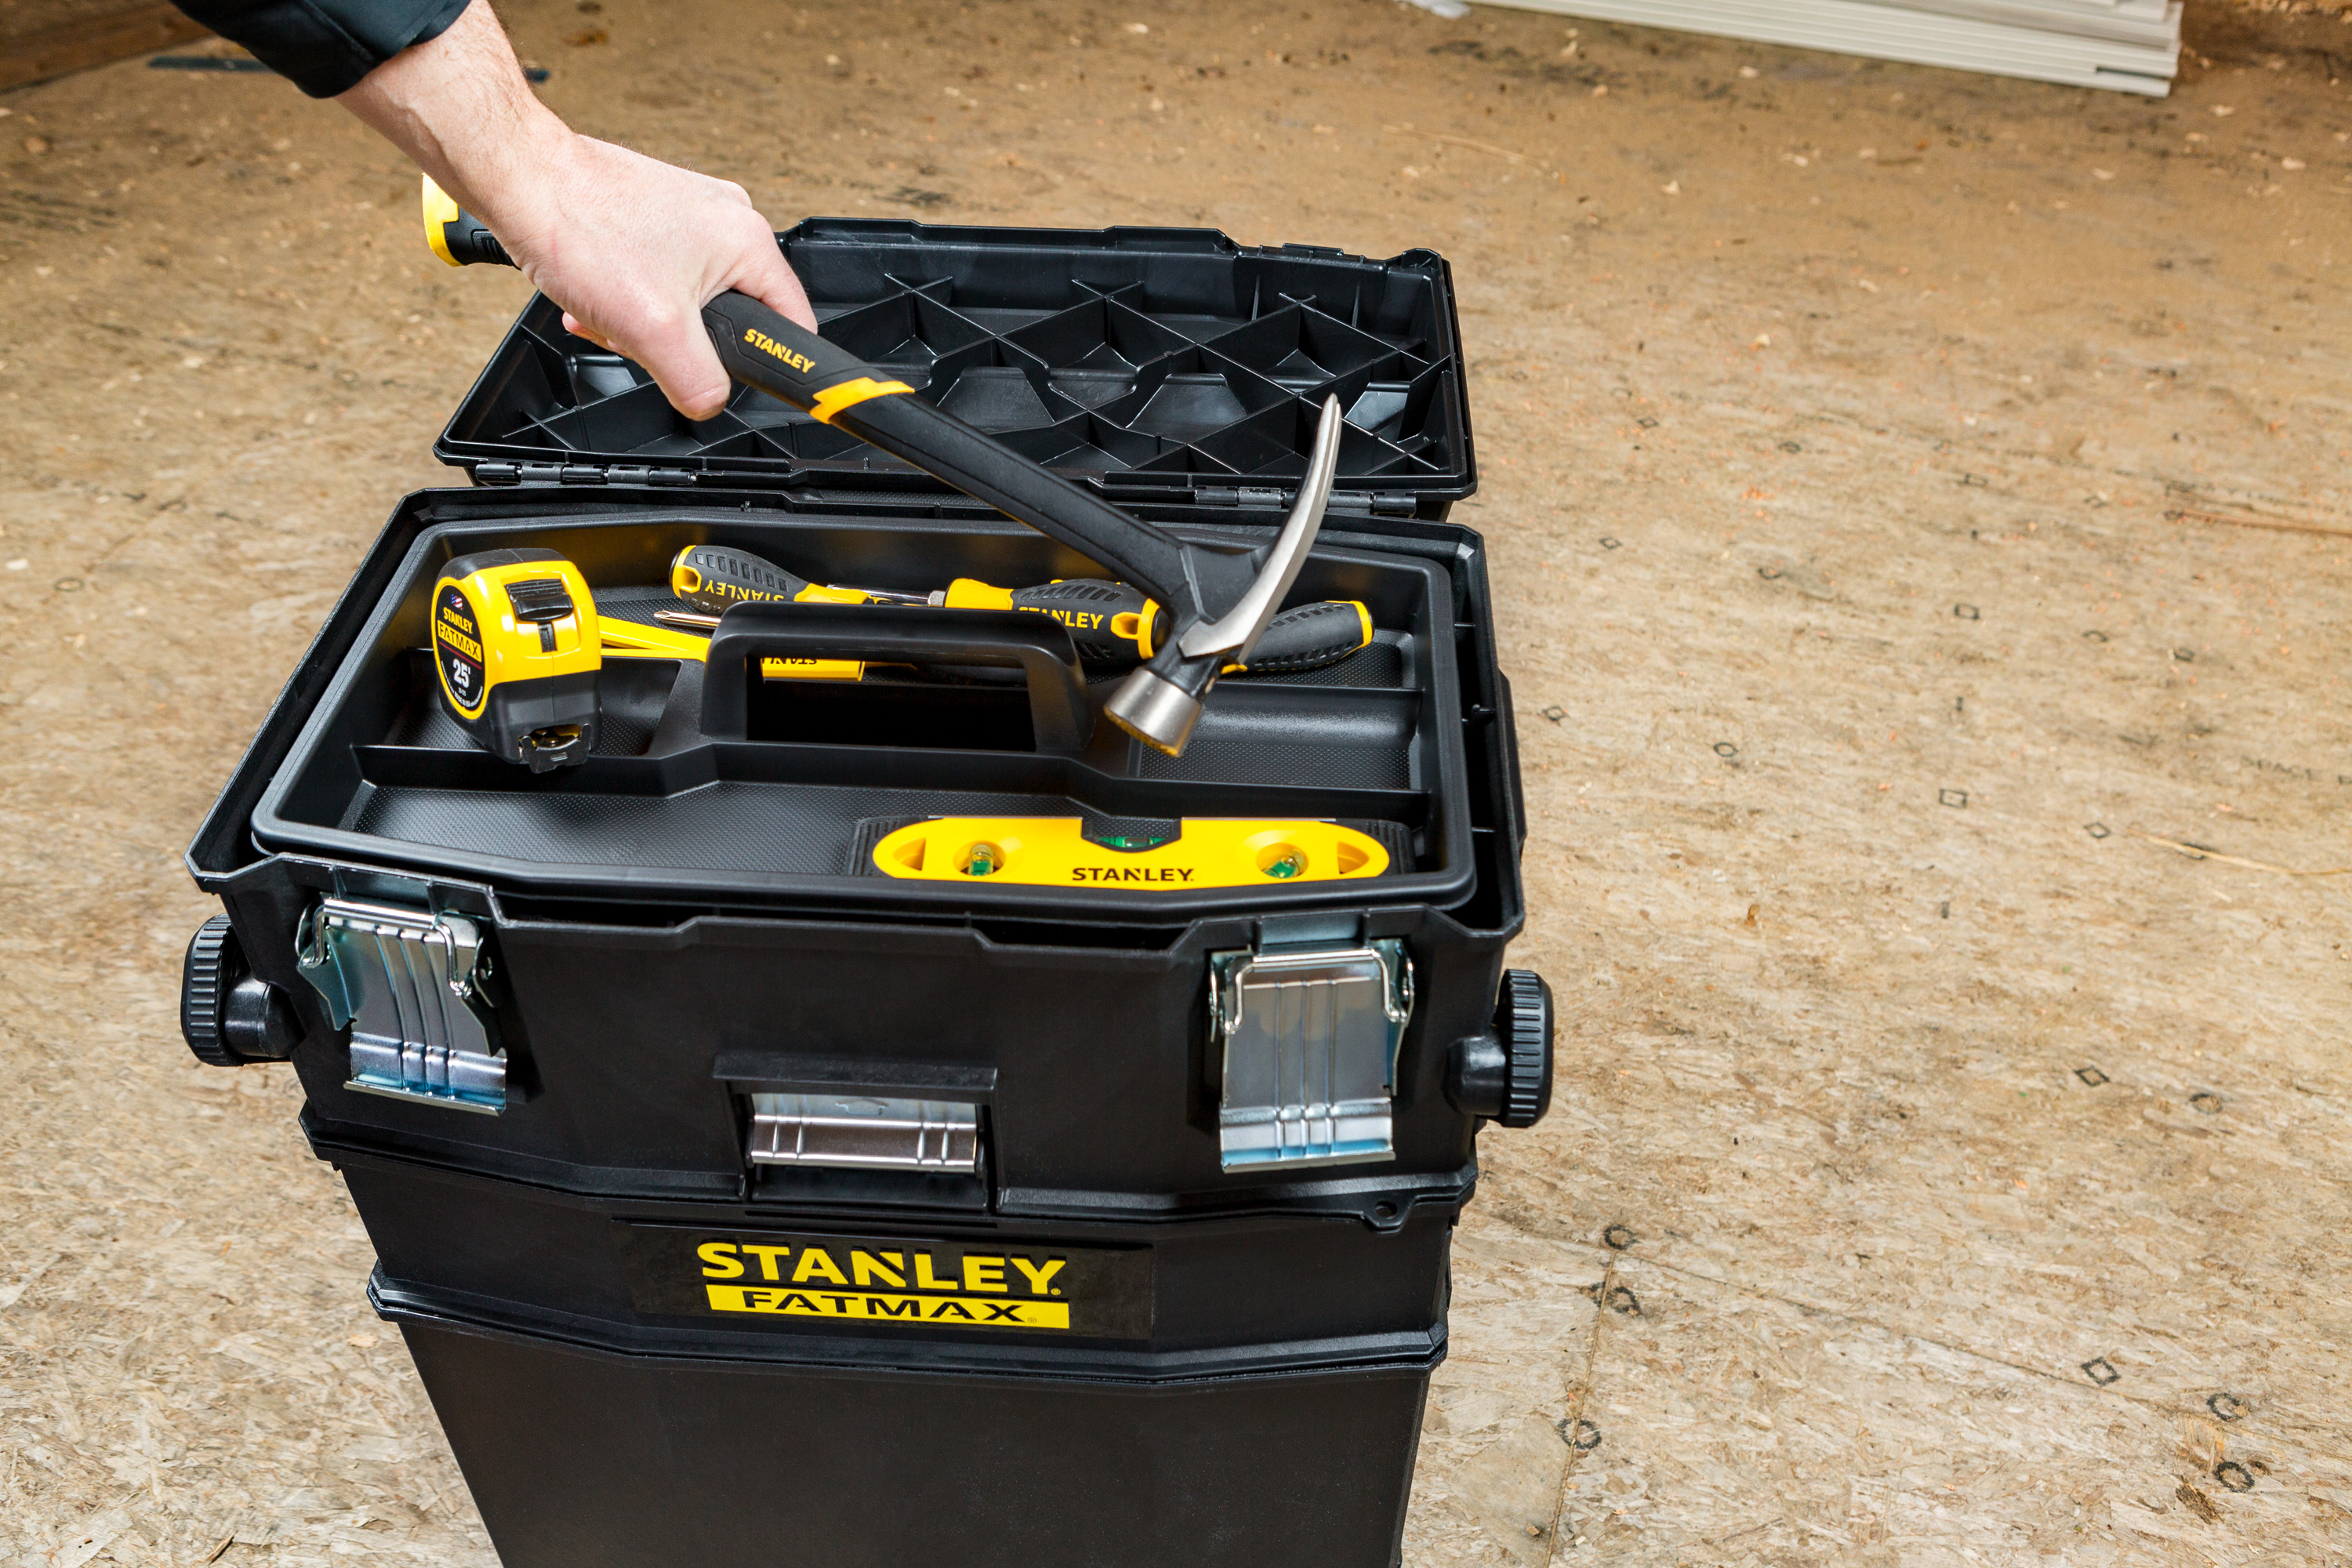 STANLEY FATMAX 020800R 4-in-1 Mobile Work Station - image 2 of 28